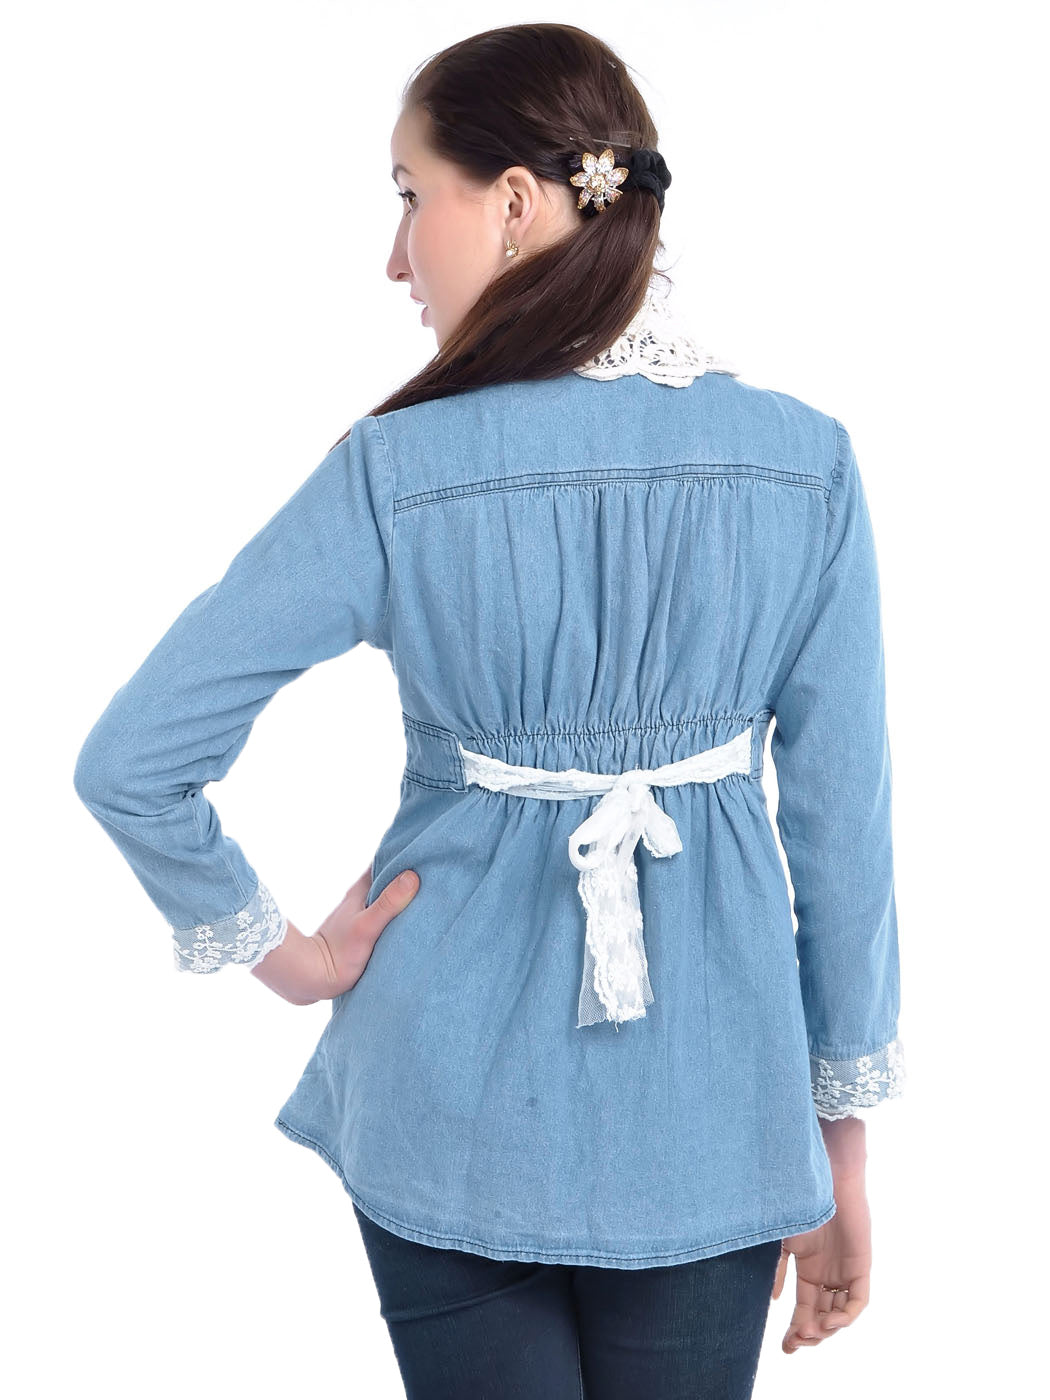 Blue Crochet Collar and Lace Overlay Cuffs Button Front Blouse